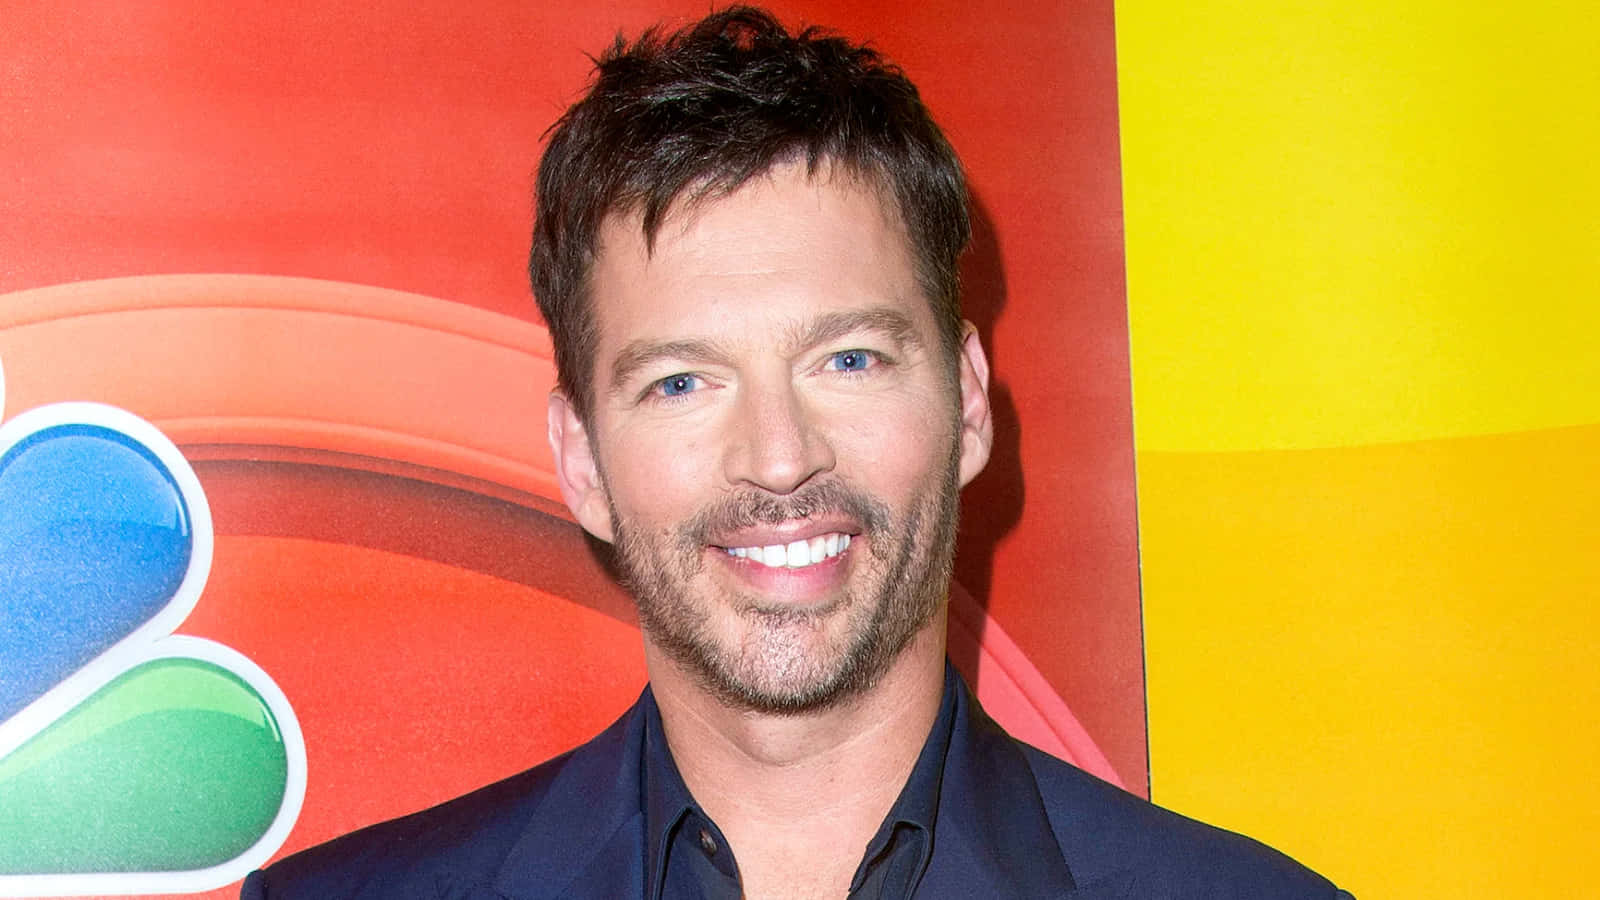 Harry Connick Jr smiling on stage Wallpaper